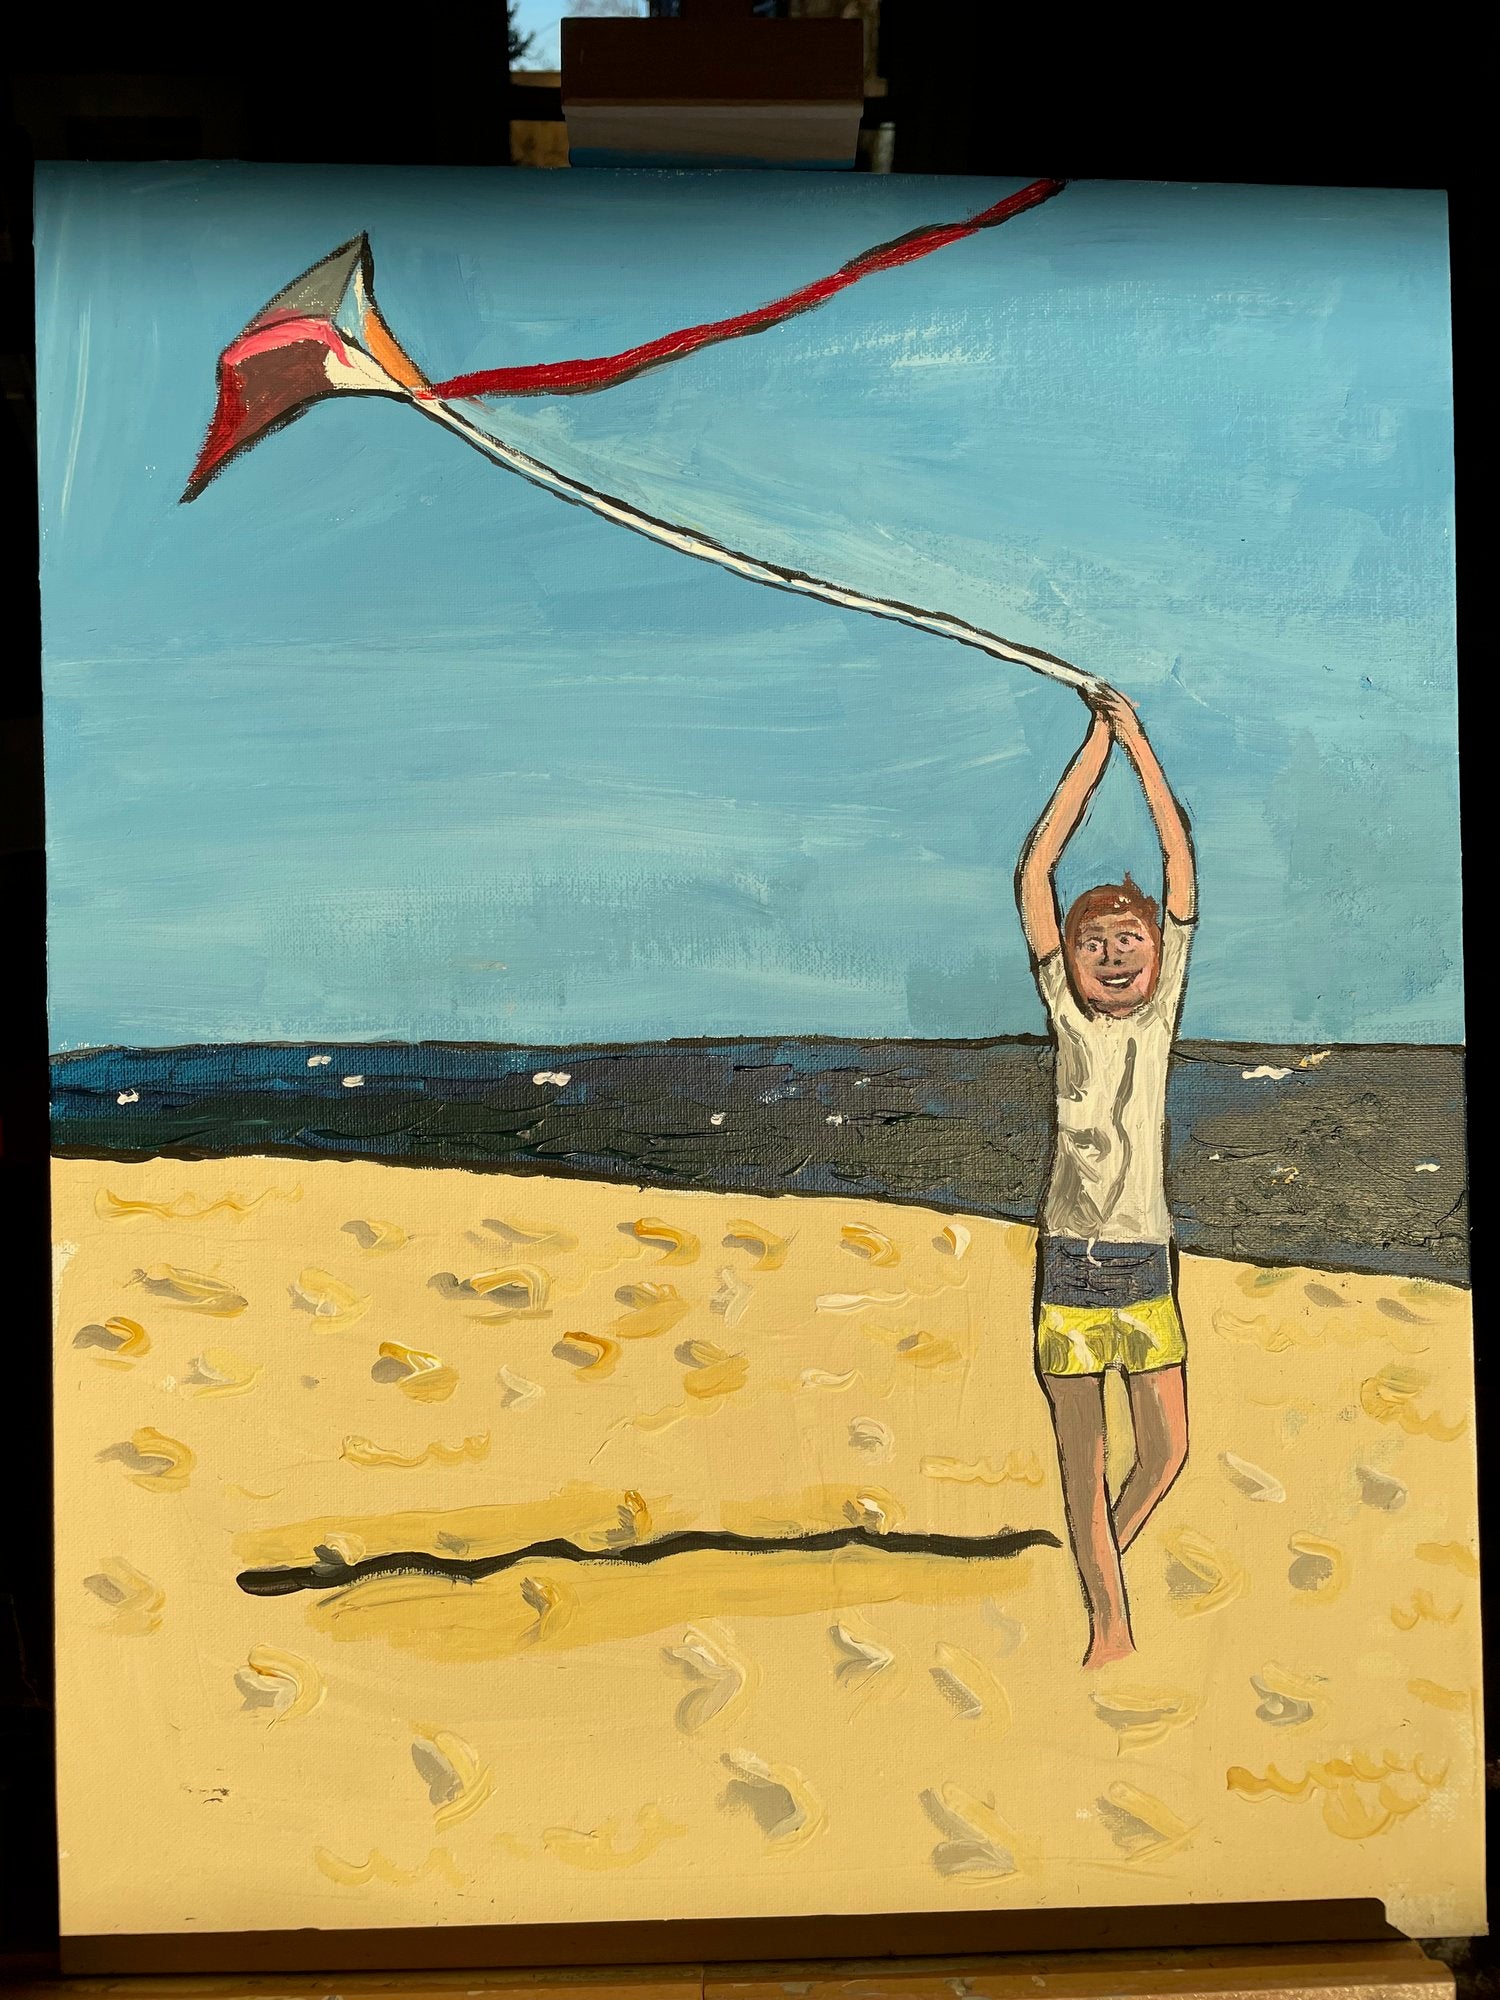 Michael Signer painting of boy with kite on beach with water in background.